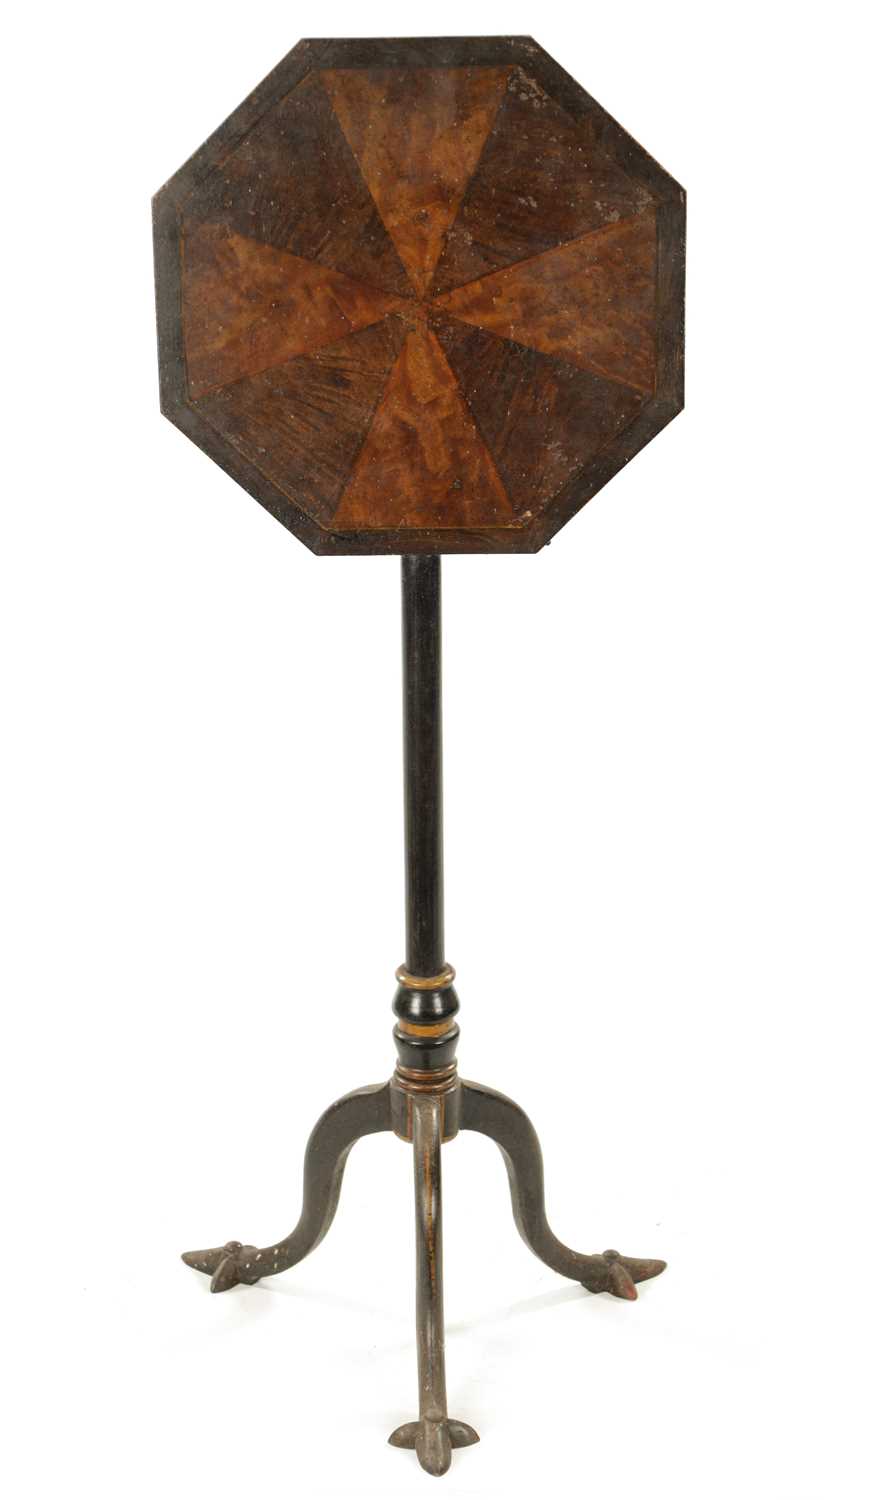 Lot 39 - A RARE 19TH CENTURY PROBABLY AMERICAN ADJUSTABLE CAST IRON TABLE / MUSIC STAND WITH OCTAGONAL SIMULATED TOP